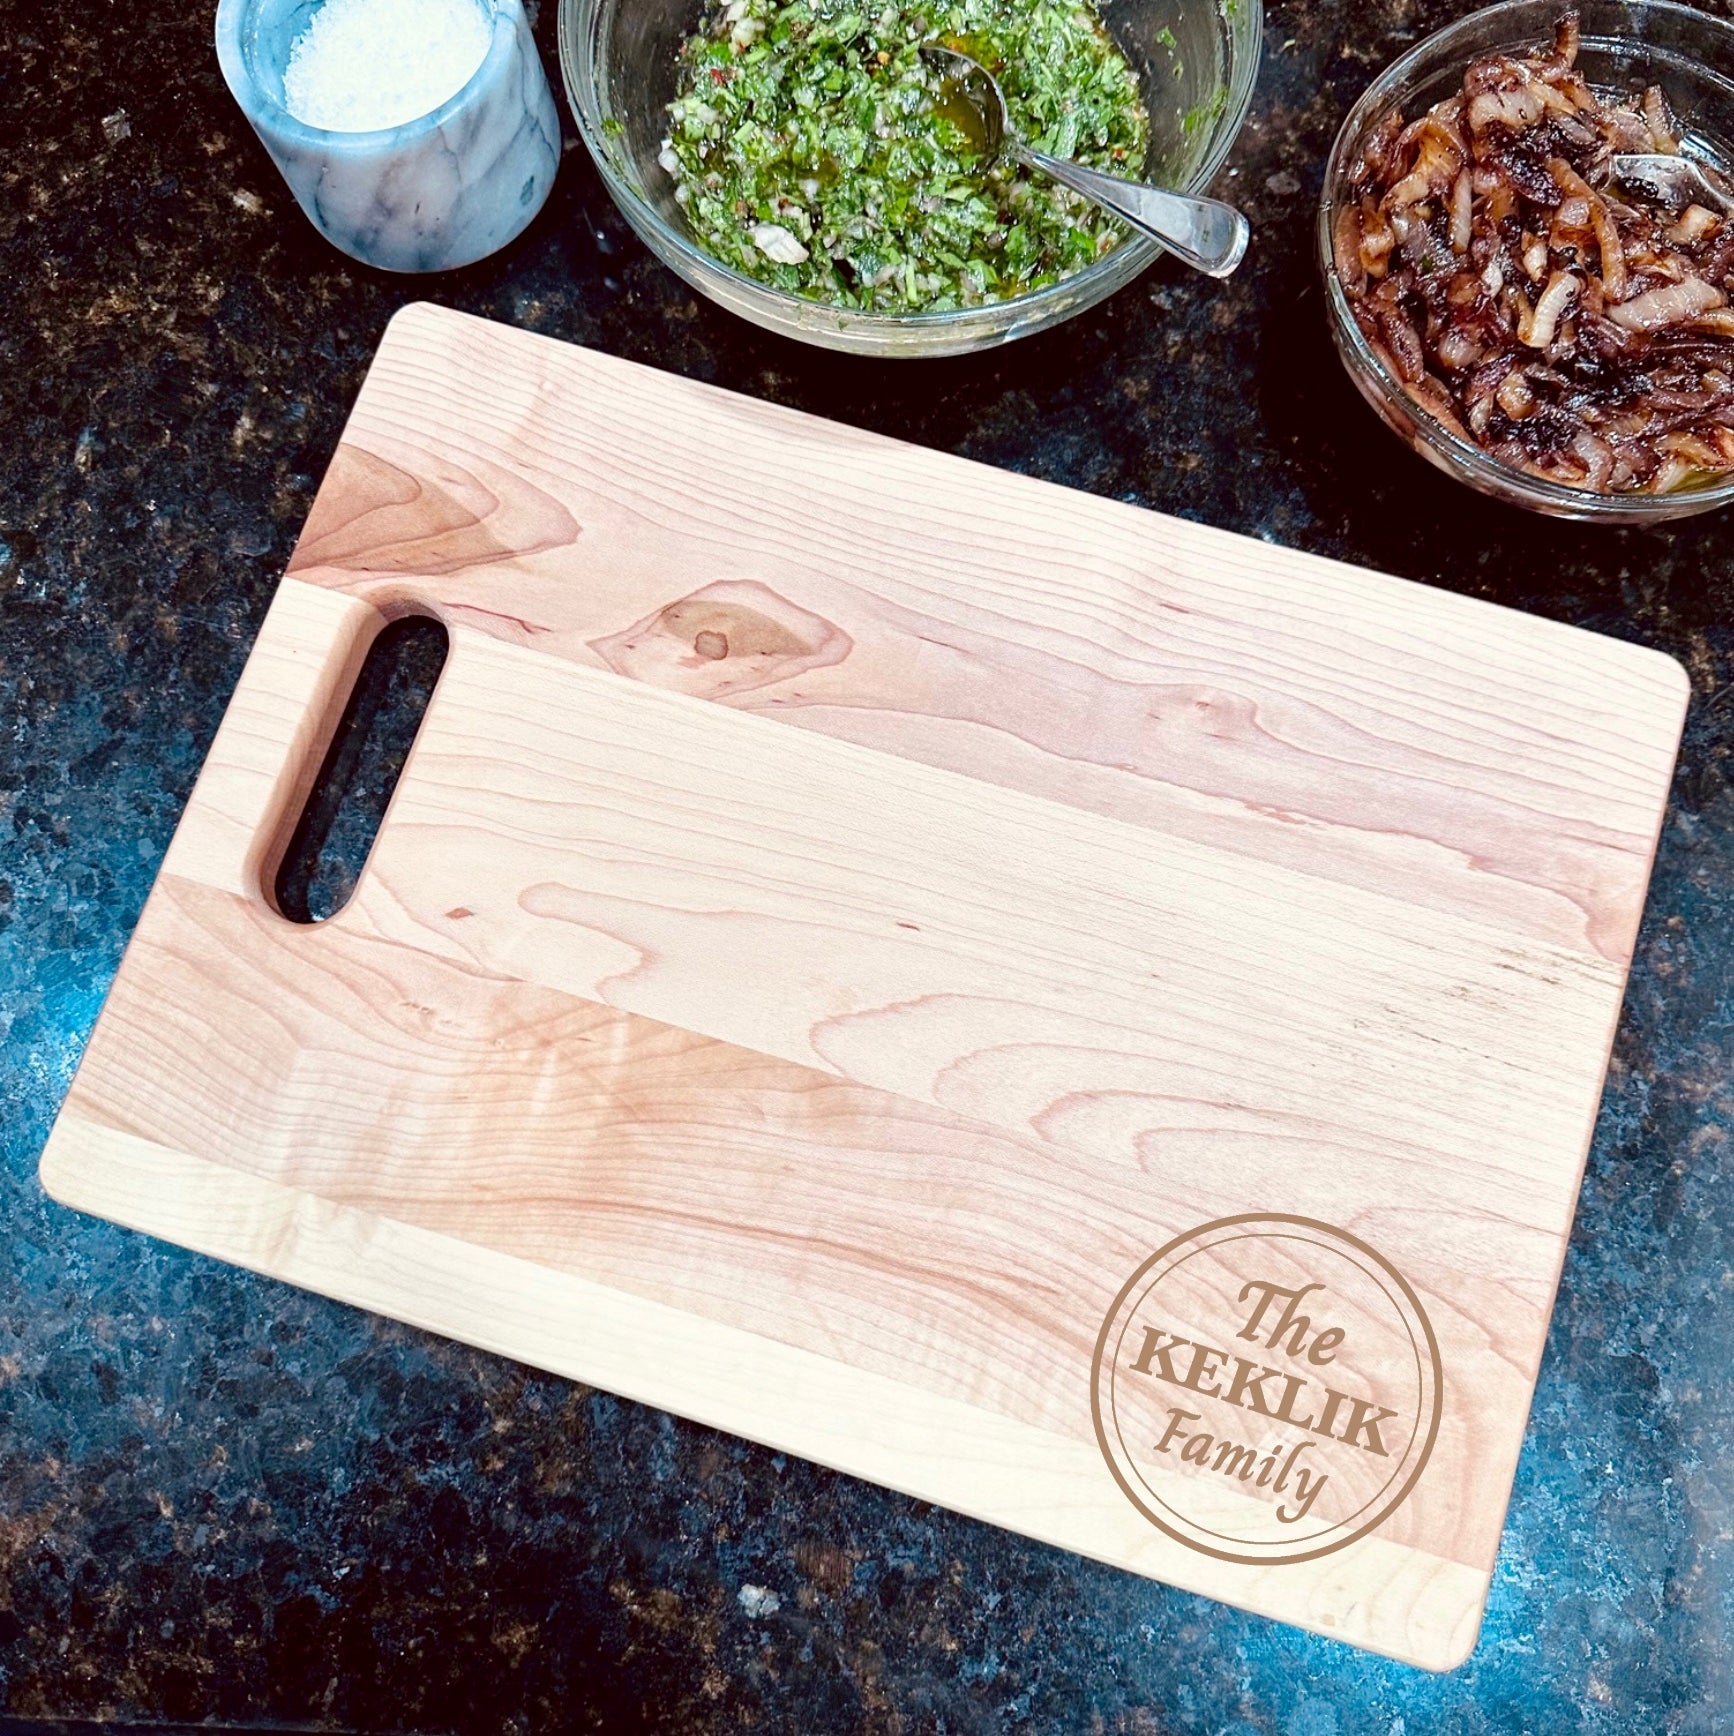 PERSONALIZED GIFT KITCHEN DECOR RECIPE CUTTING BOARD MOTHERS DAY GIFT GIFT  FOR HER